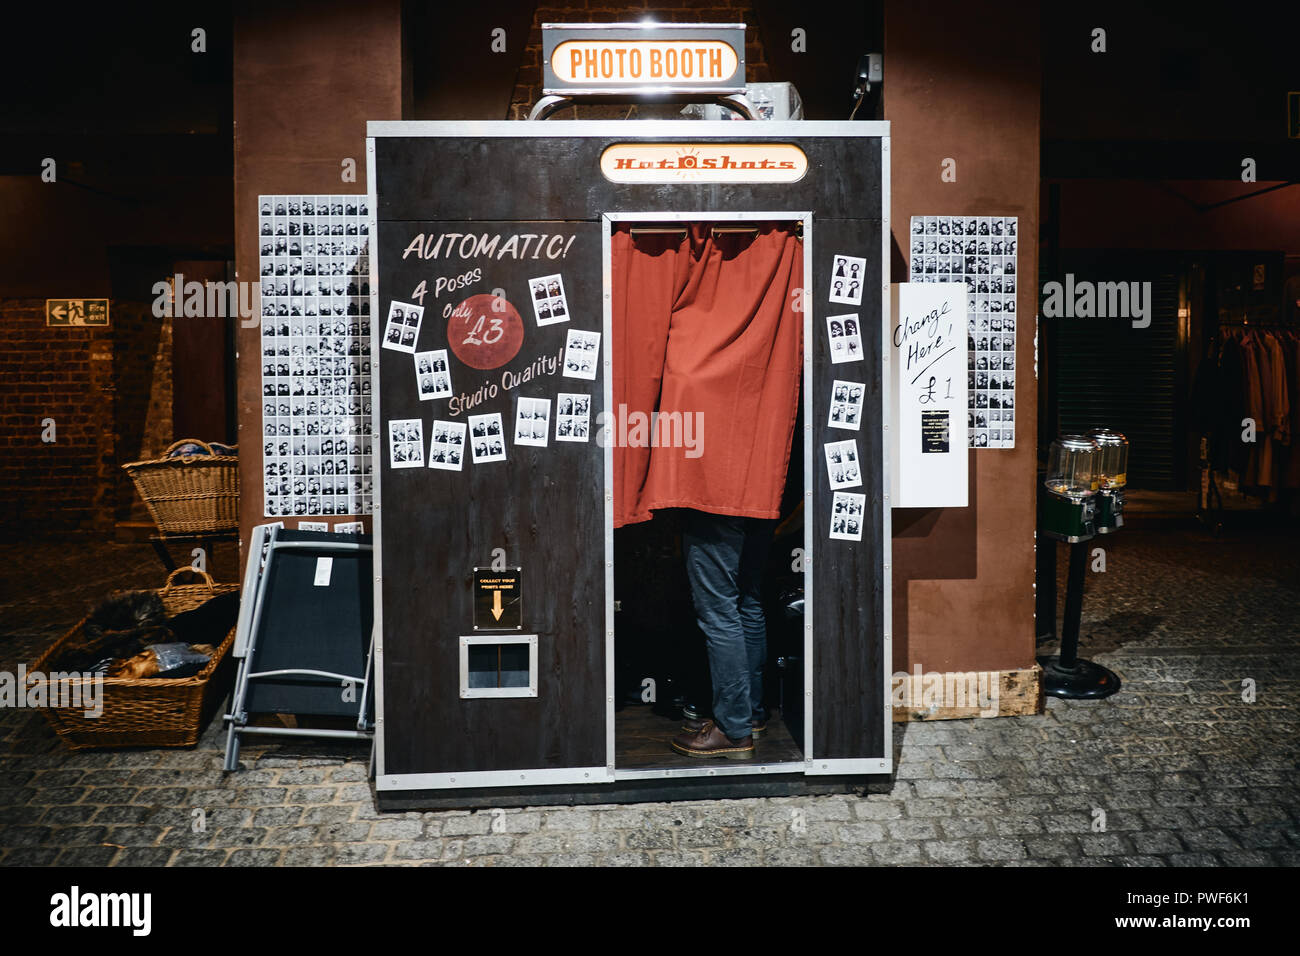 A fully working retro phot booth as seen in Camden Market, Camden Town, London UK. Photo by Gergo Toth / Alamy Live News Stock Photo